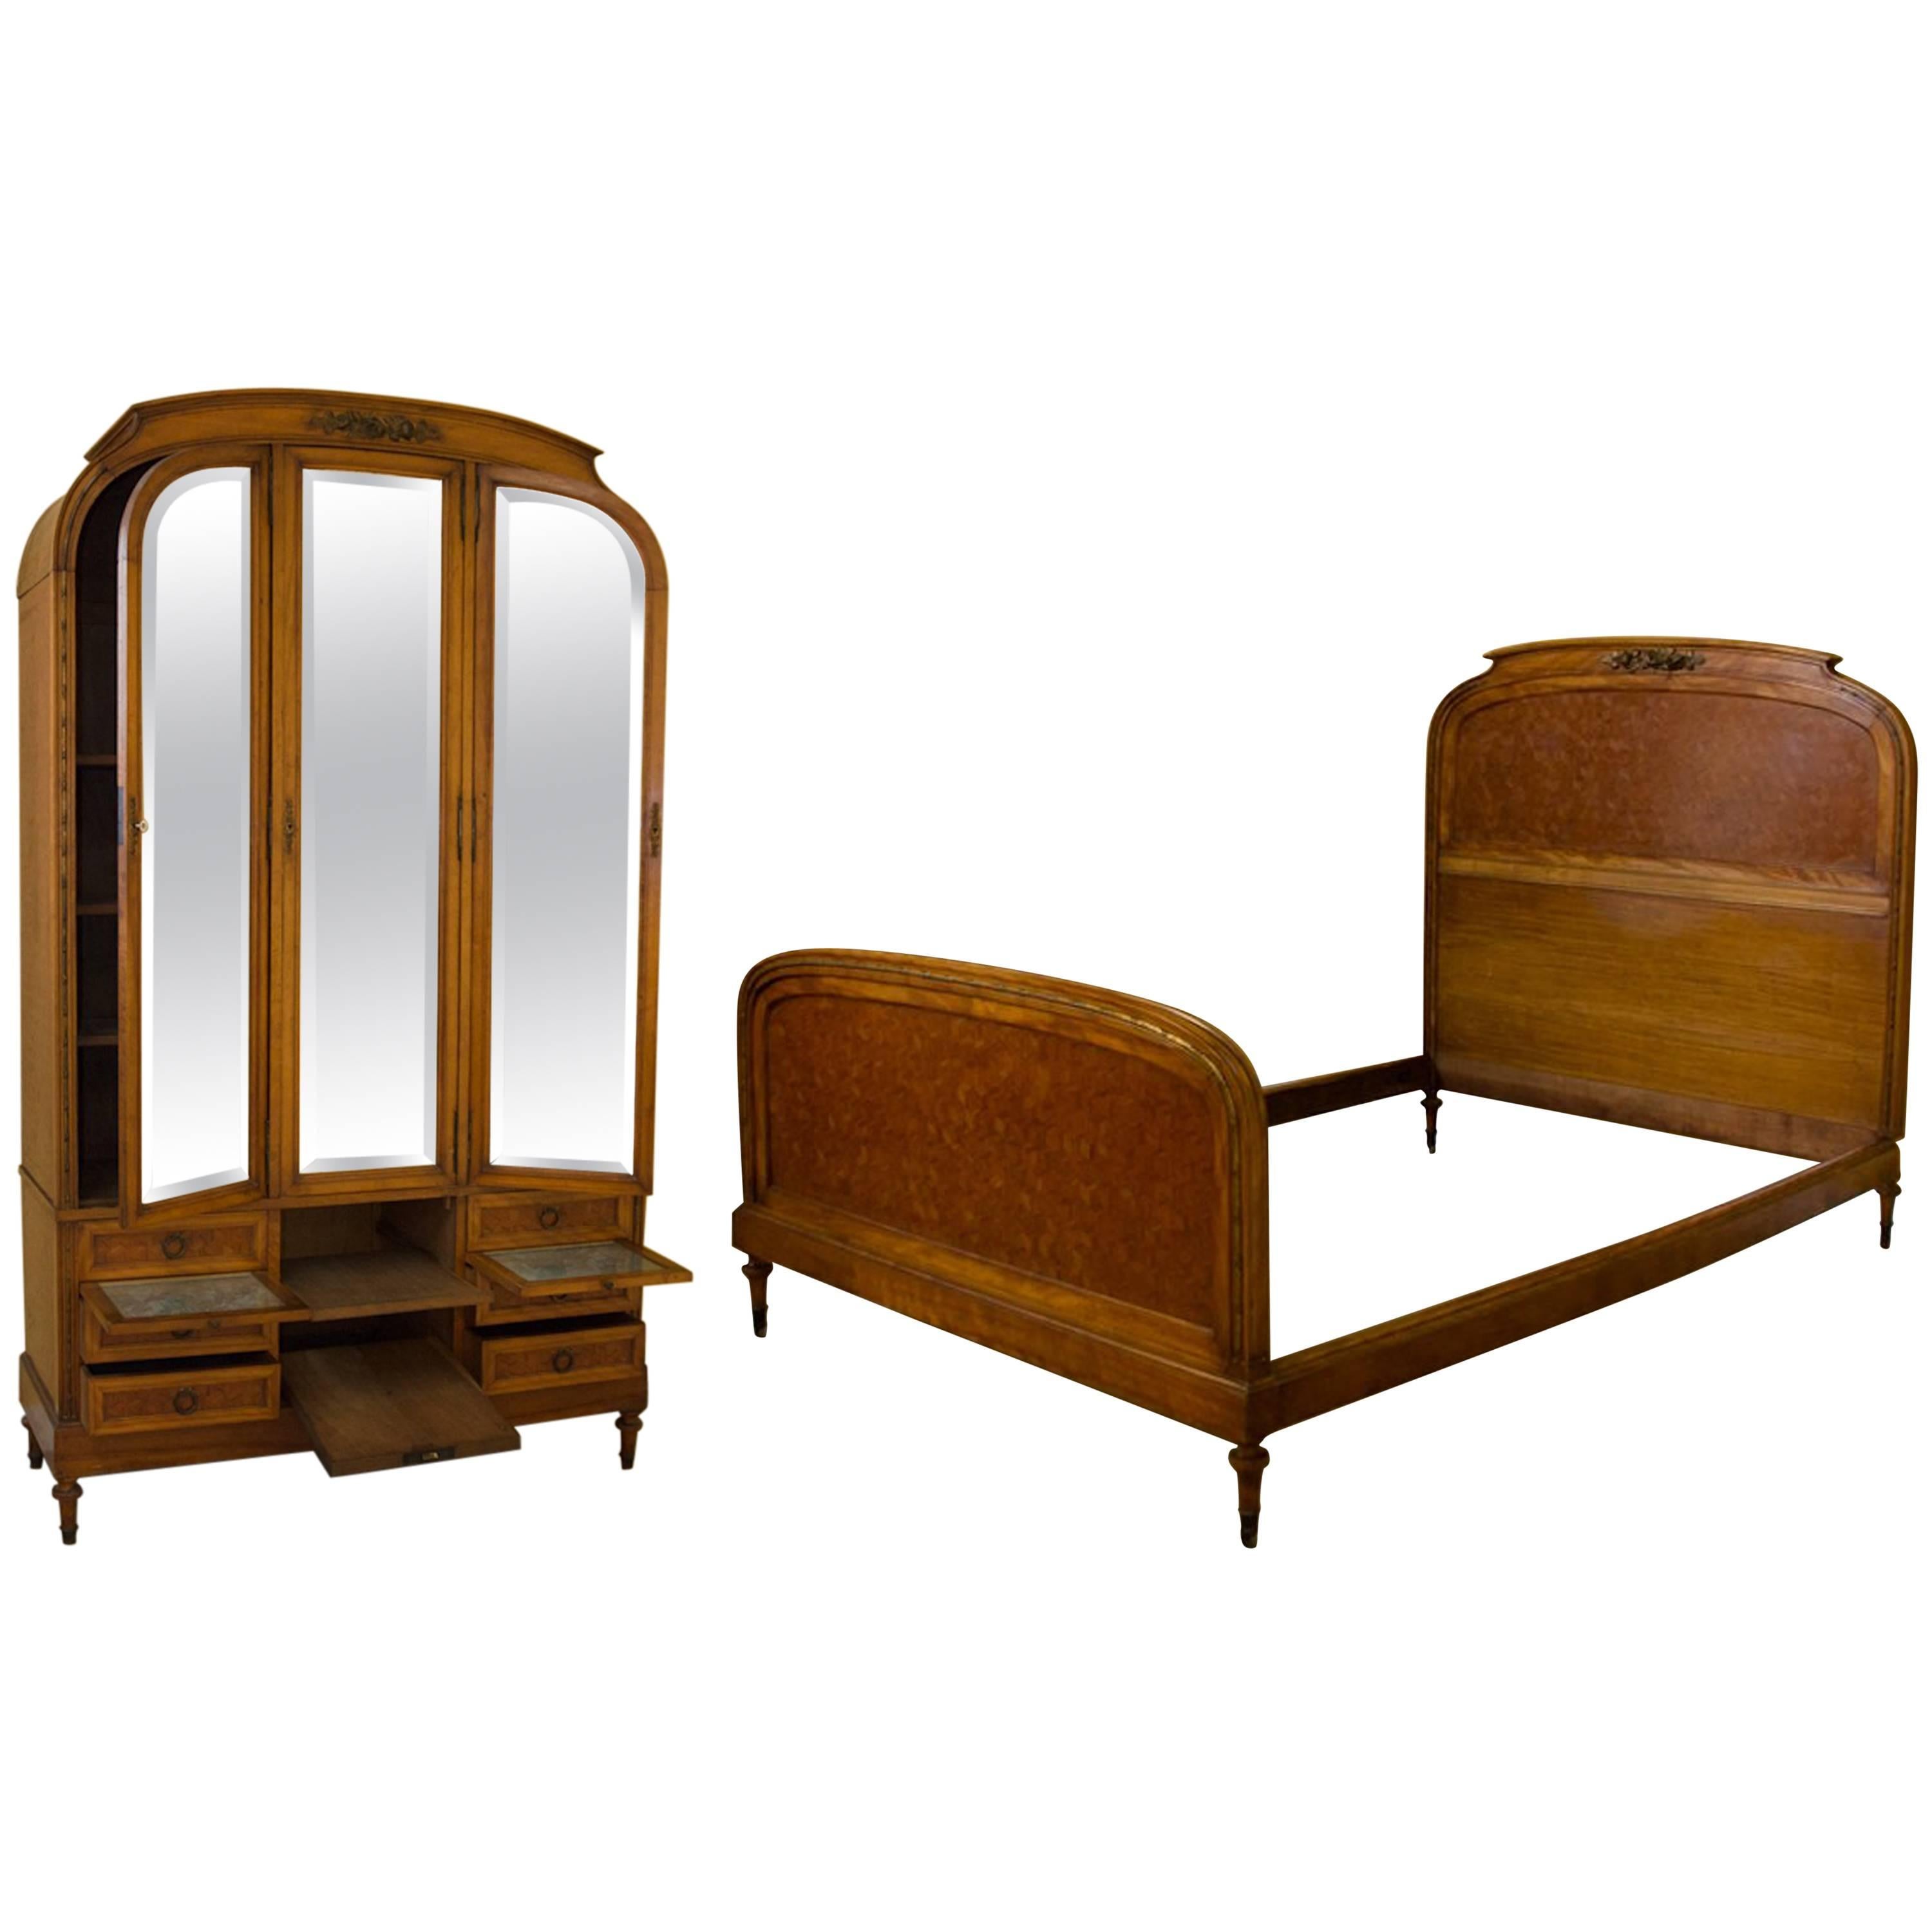 Art Deco Armoire Dressing Table Compendium and Bed For Sale